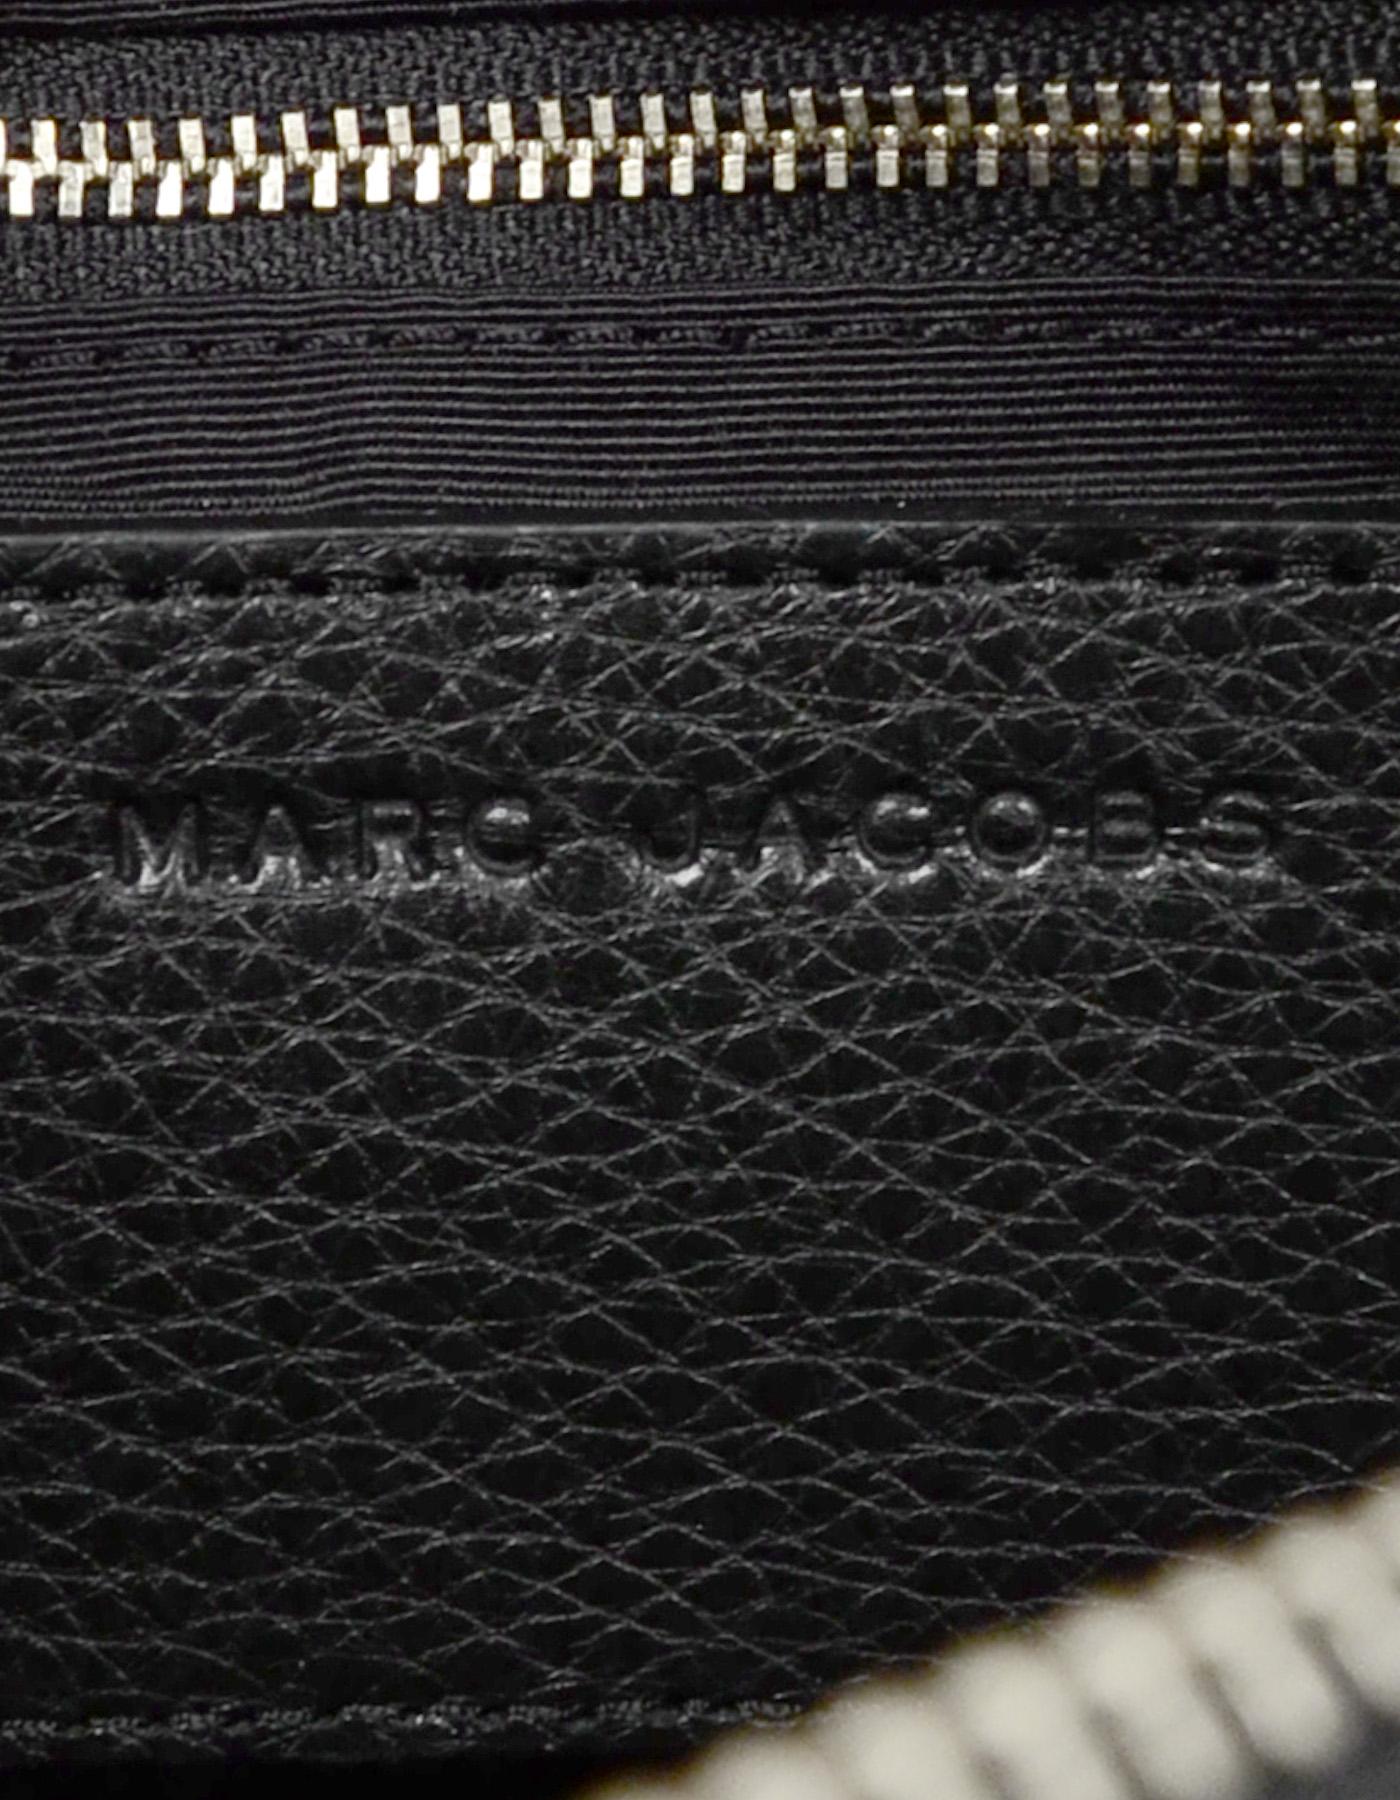 Marc Jacobs Black Leather Star Embroidered Boston Bag NWT rt $495 1